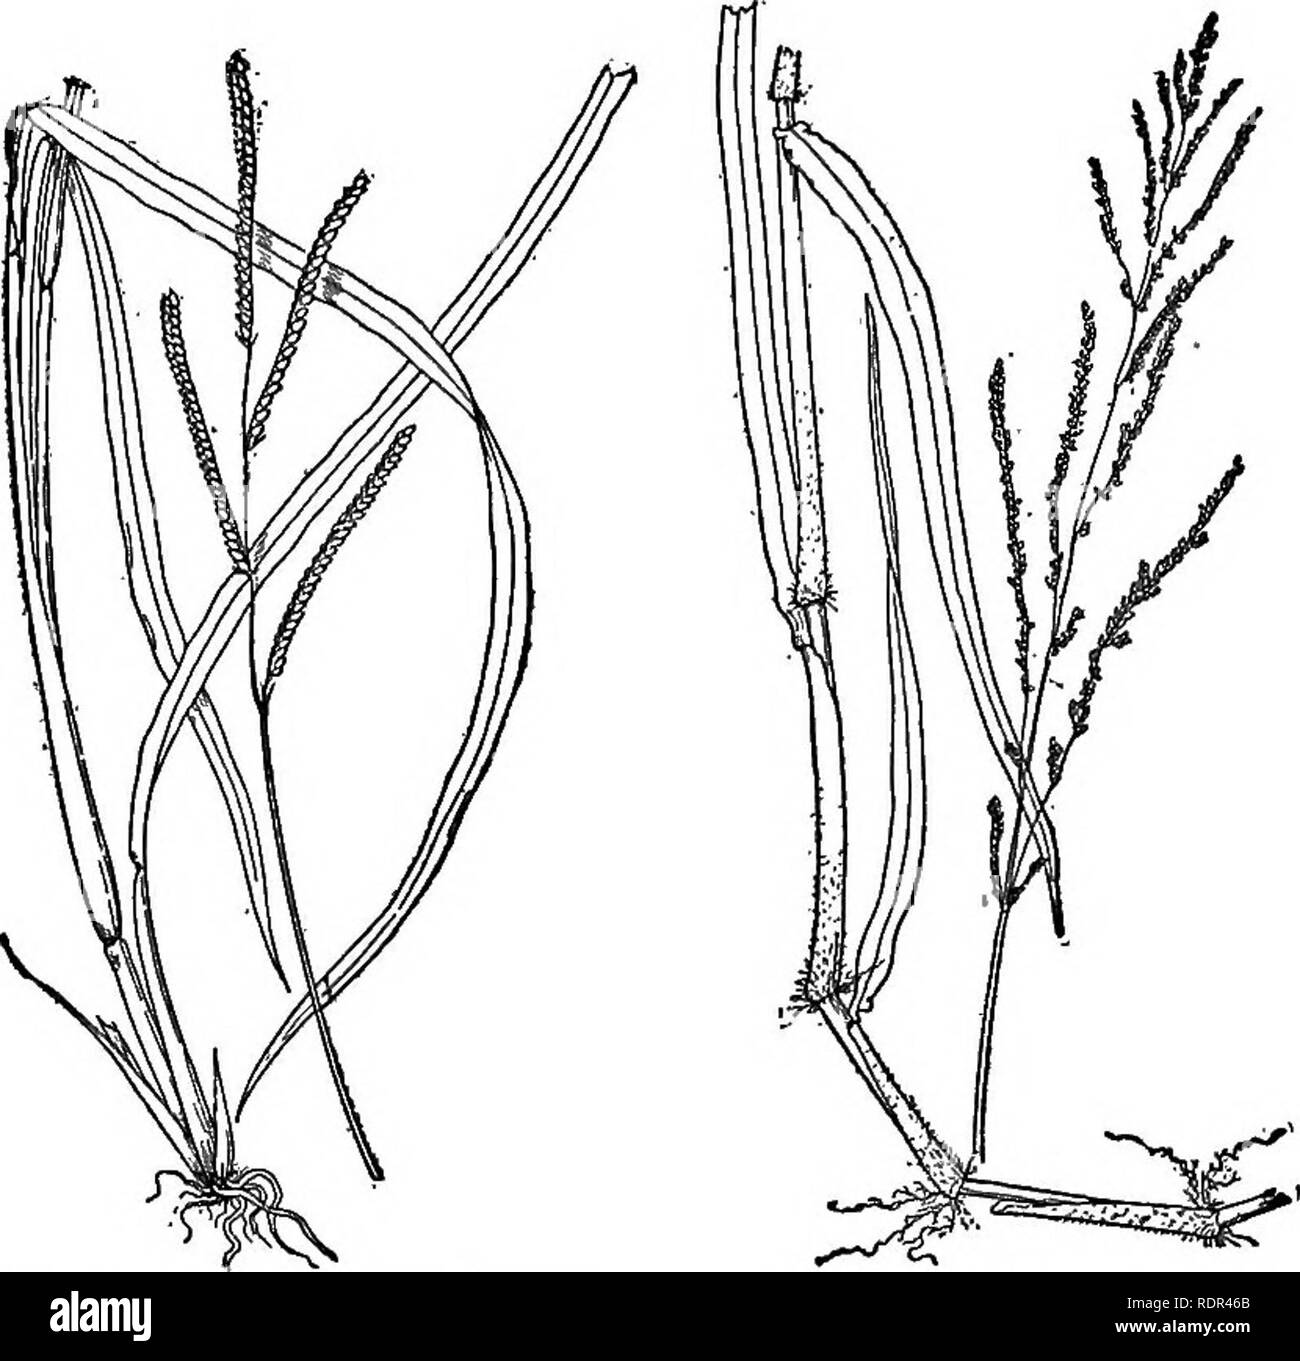 . Cyclopedia of farm crops, a popular survey of crops and crop-making methods in the United States and Canada;. Farm produce; Agriculture. Fig. 519. Sorghum {Sorghum vulgare). Fig. 520. Crab - grass (Syntheriema sanguinalis). A very common weedy grass.. Fig. 521. Water-grass (.Paspa- lum dilatatum). Fig. 522. Para-grass {Panieum Tnolle), with spikelets similar in structure to those of Panicum but arranged in one-sided, more or less digitate spikes. Considered by many as a section (Digitaria) of Panicum. sanguinalis, Dnlac. Crab-grass. (Fig. 520.) A well-known annual weed common in cultivated s Stock Photo